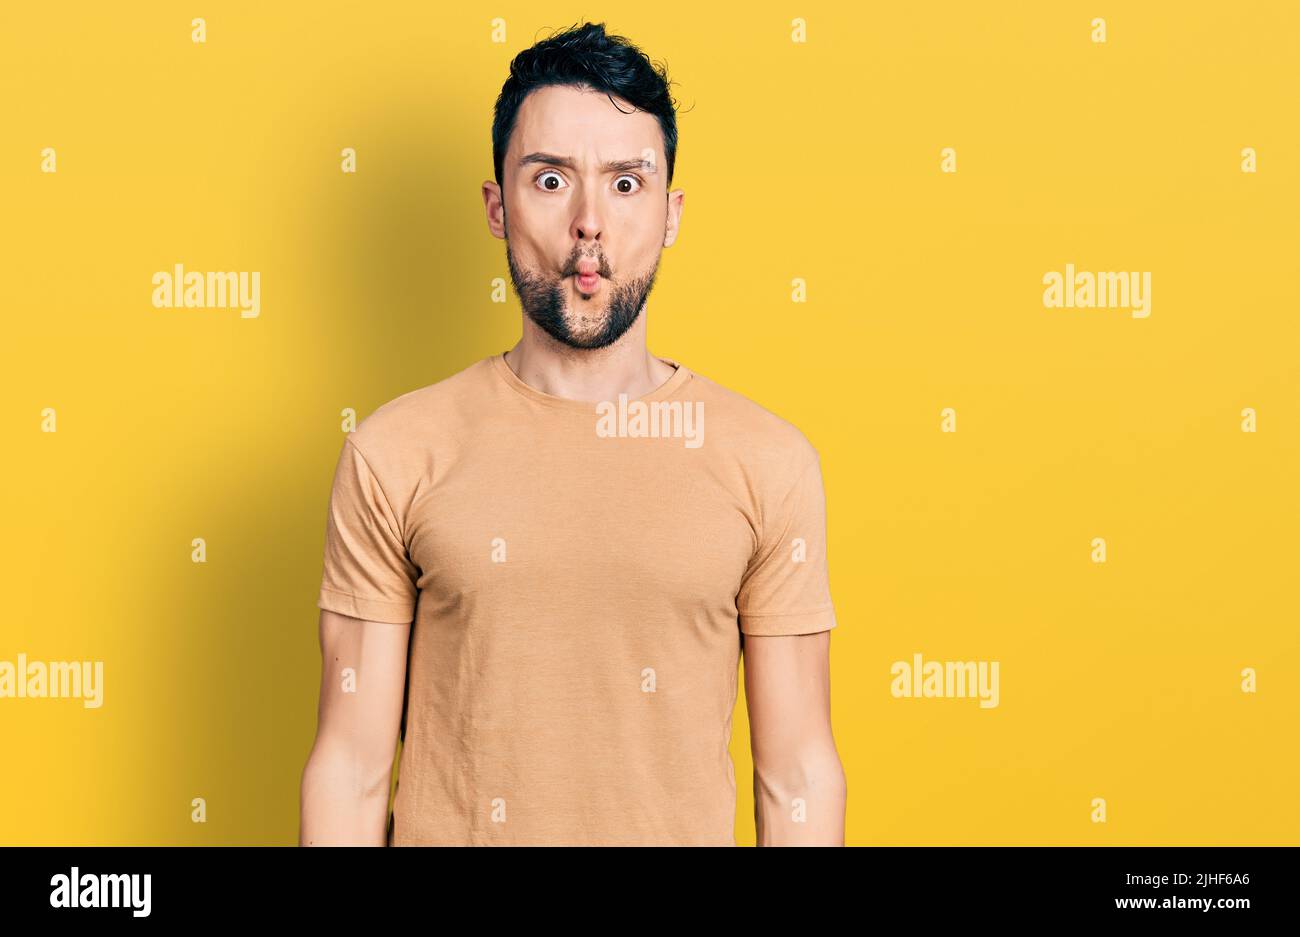 Teenager boy wearing yellow t-shirt over isolated background making fish  face with lips, crazy and comical gesture. Funny expression Stock Photo -  Alamy